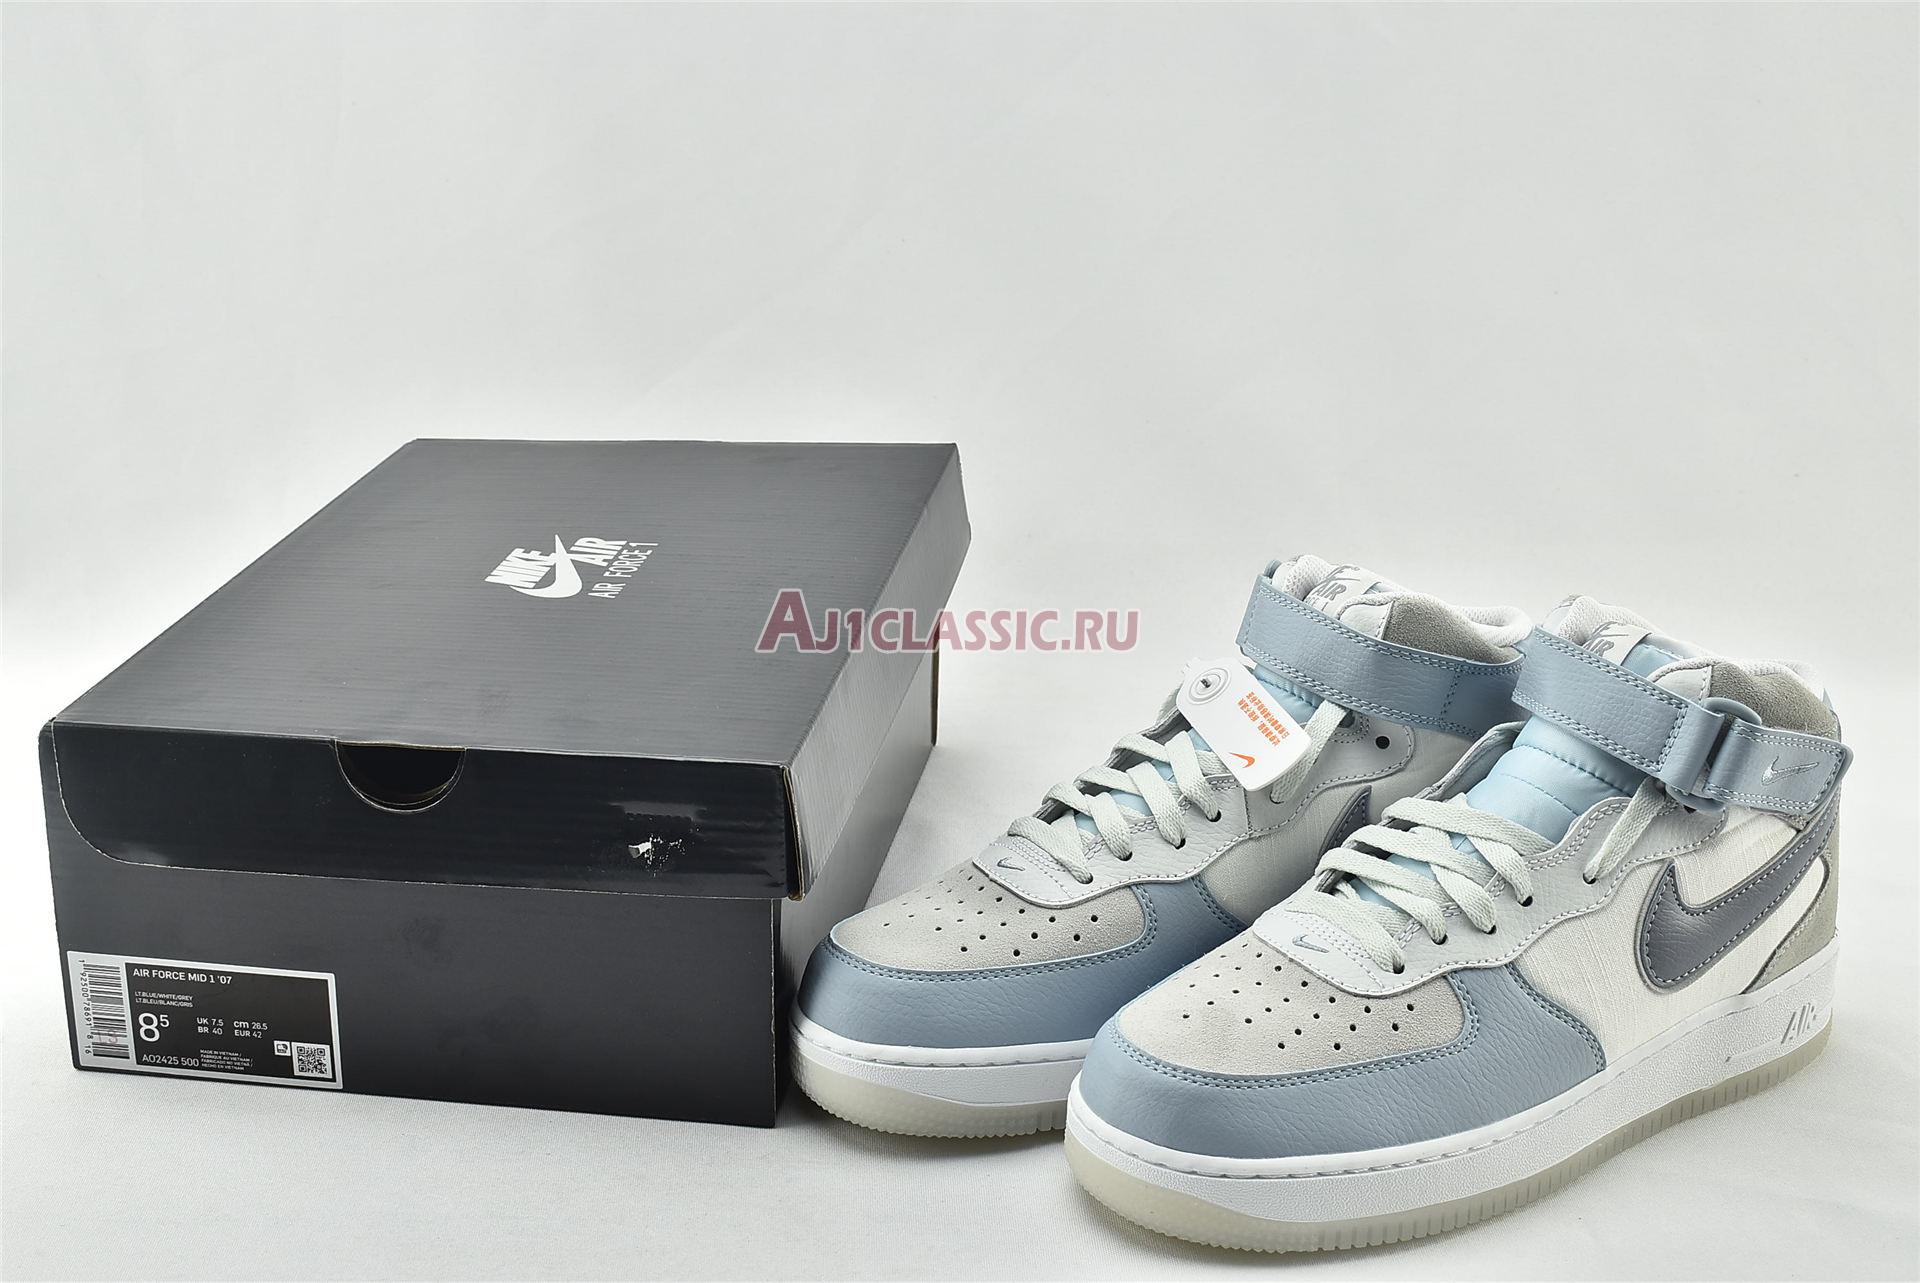 Nike Air Force 1 High 07 LV8 Light Armory Blue AO2425-500 Light Armory Blue/Obsidian Mist-Off White Sneakers